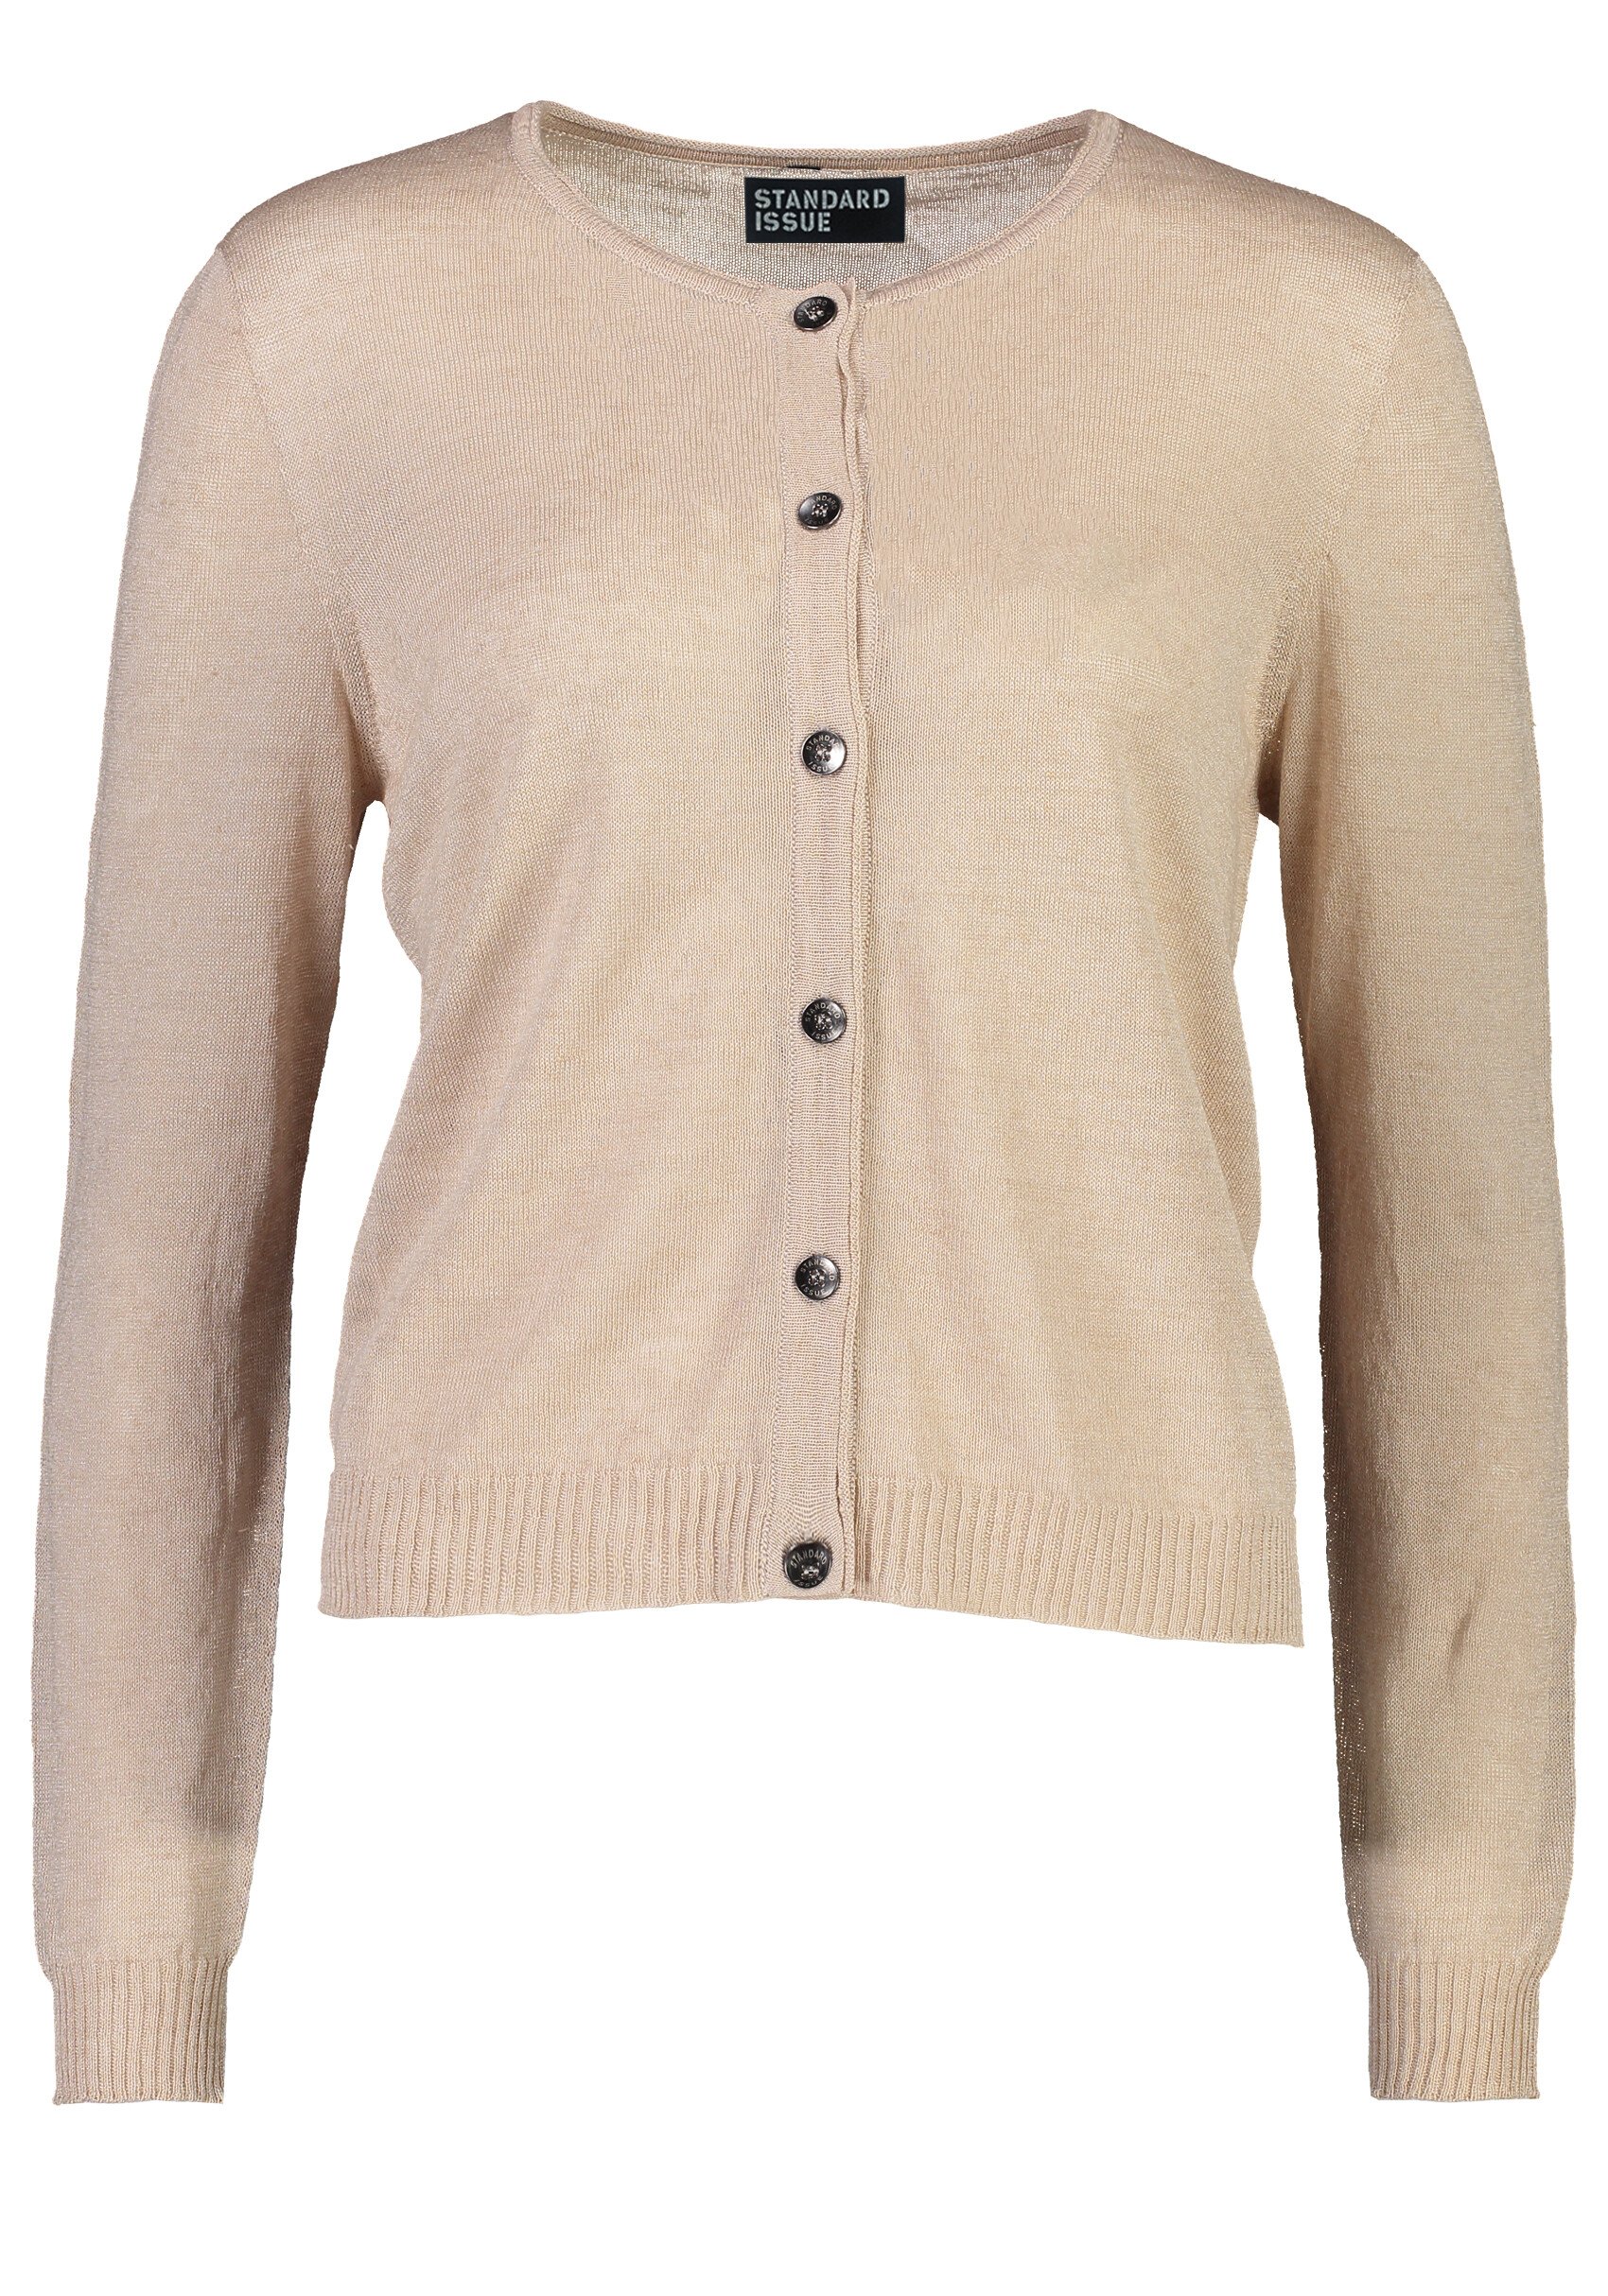 LINEN CARDIGAN (SAND)- STANDARD ISSUE SP20 Boxing Day Sale